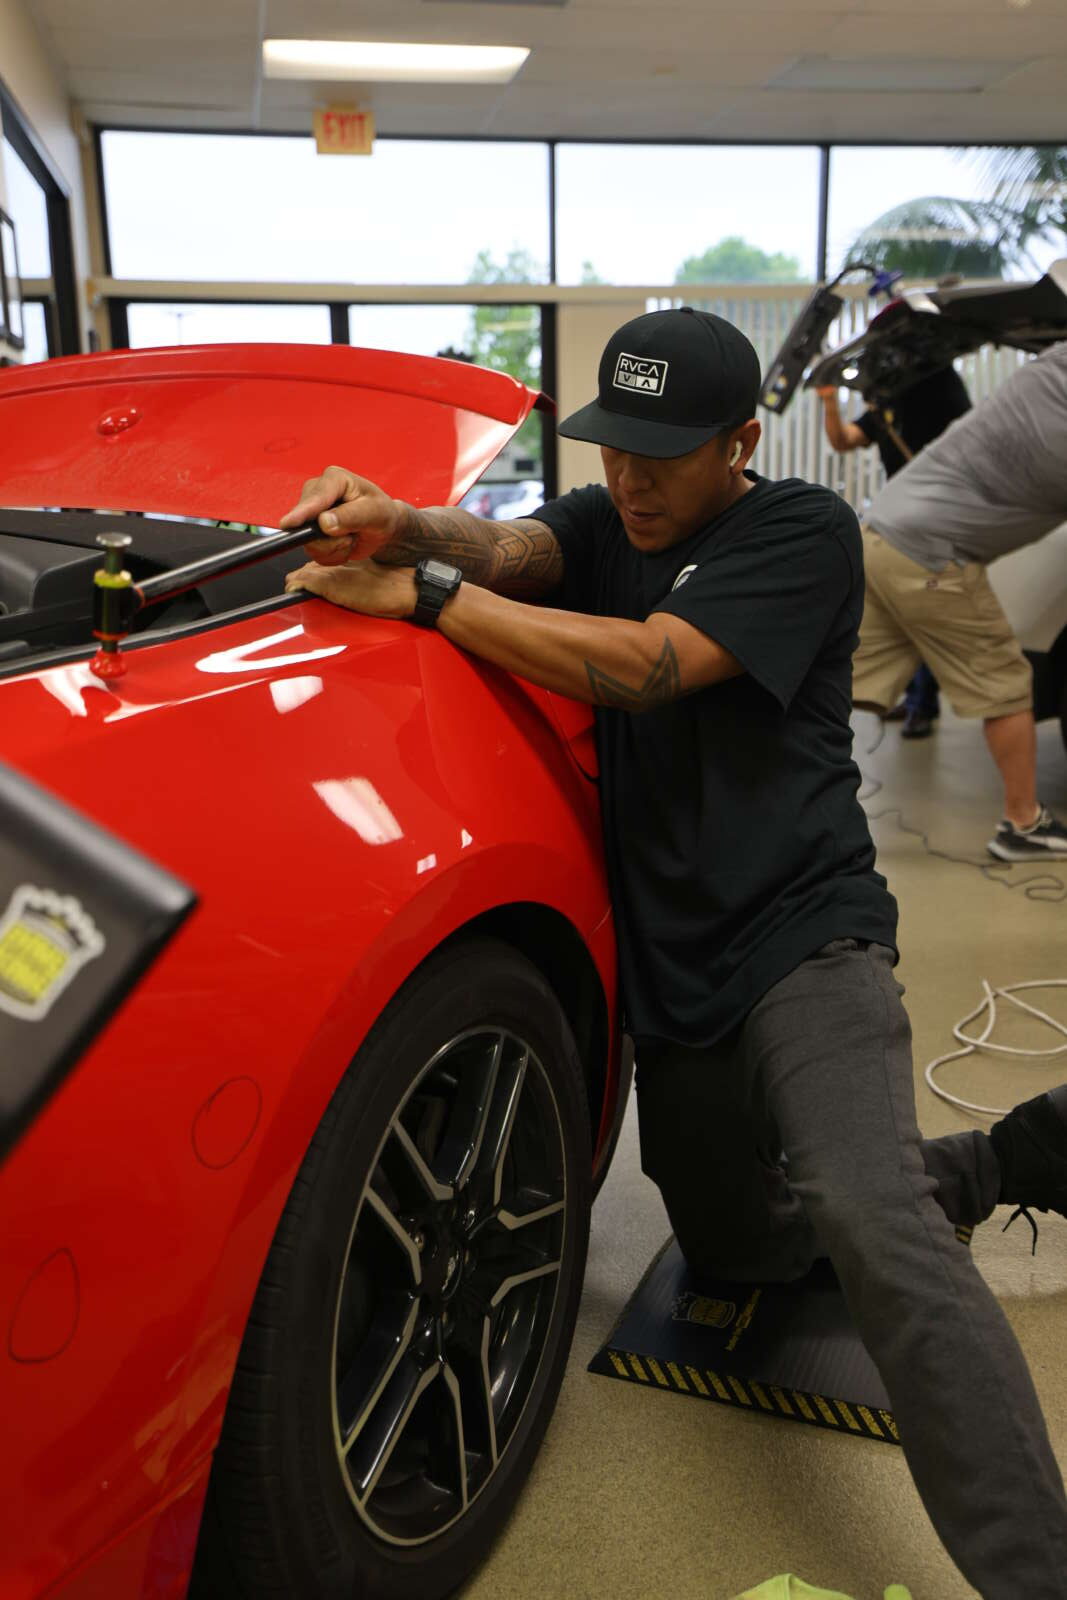 A man undergoing Advanced PDR Training while working on a red car.